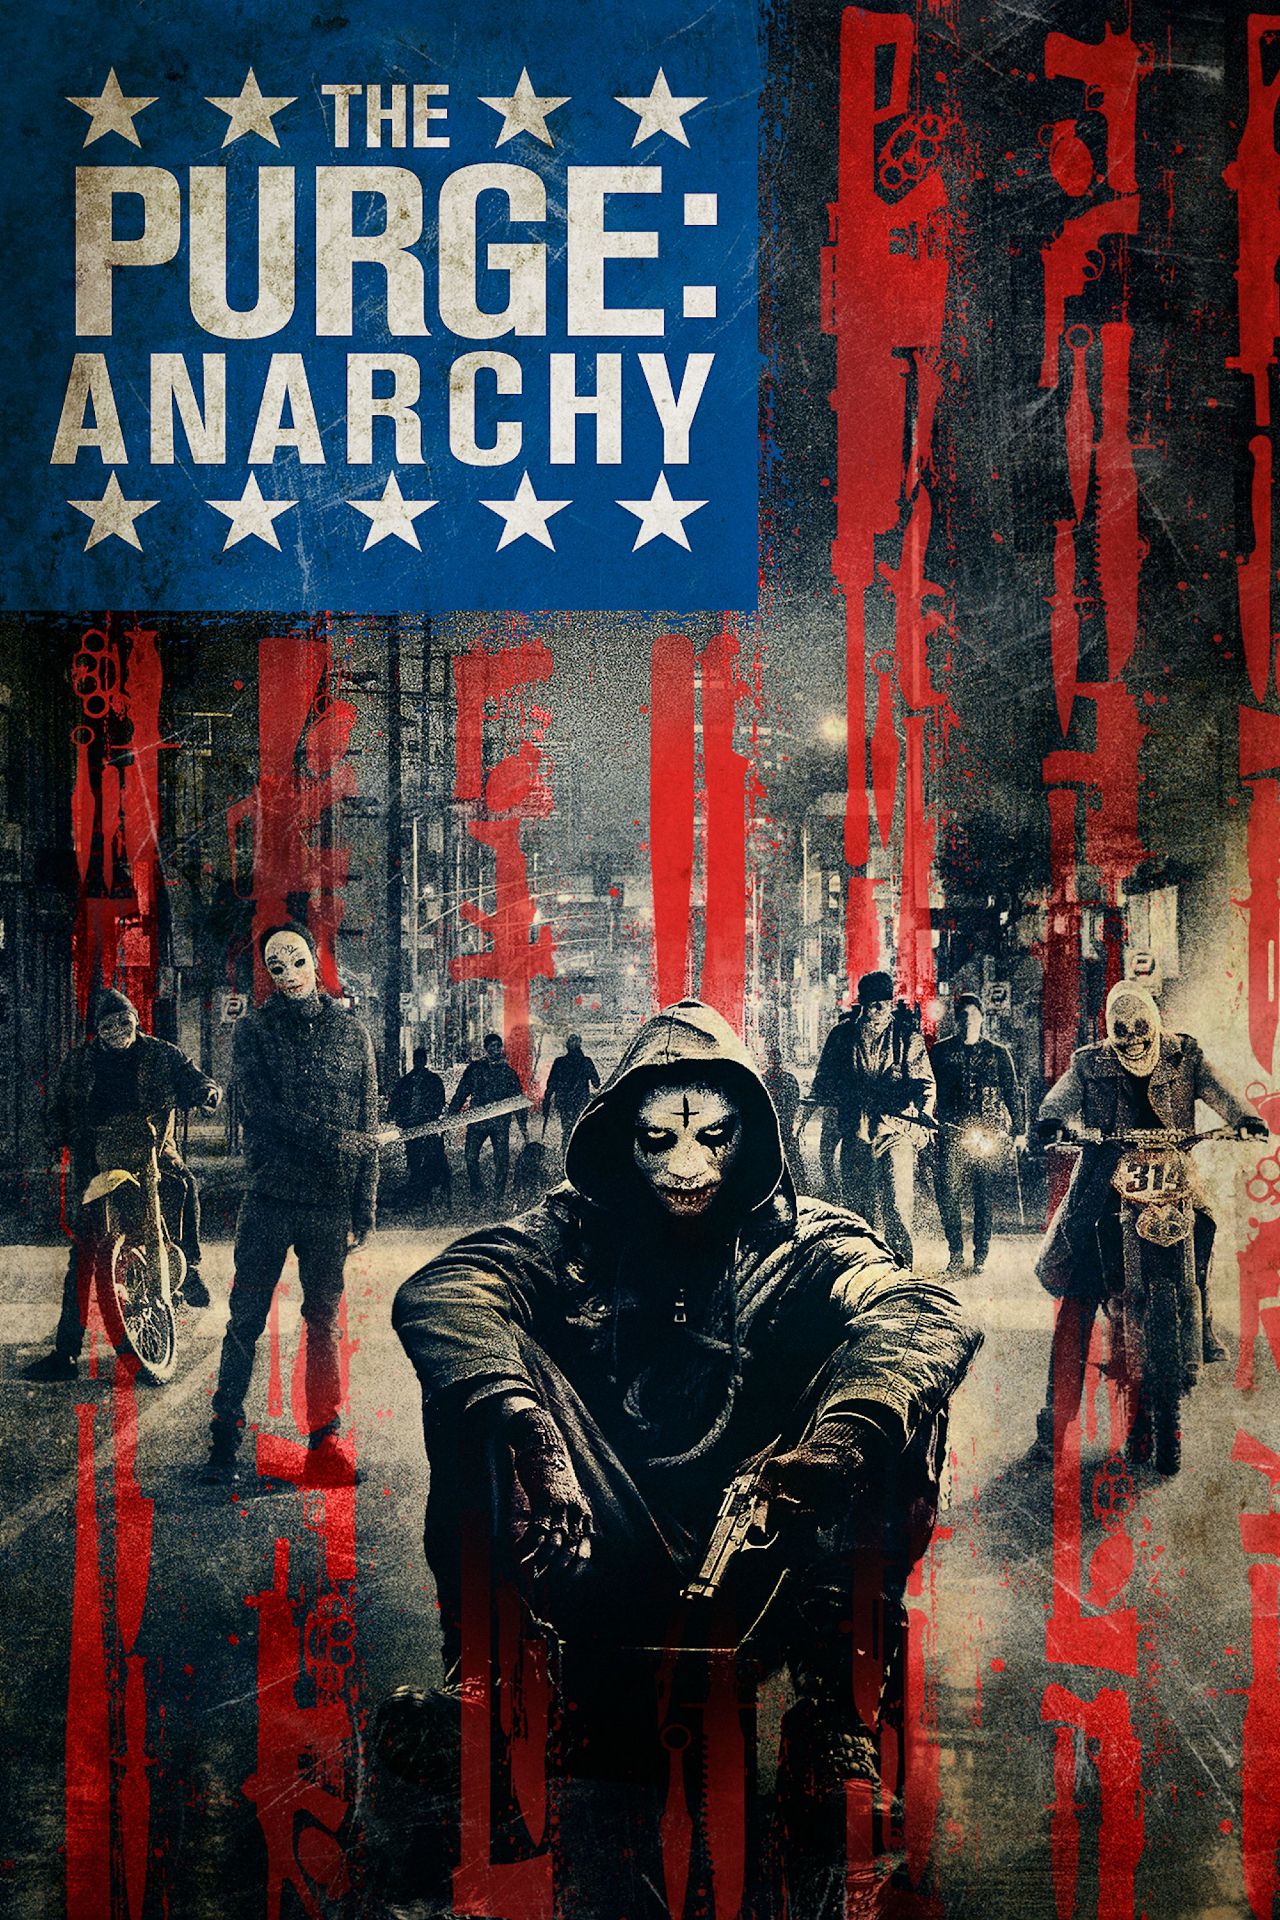 The Purge Anarchy movie poster